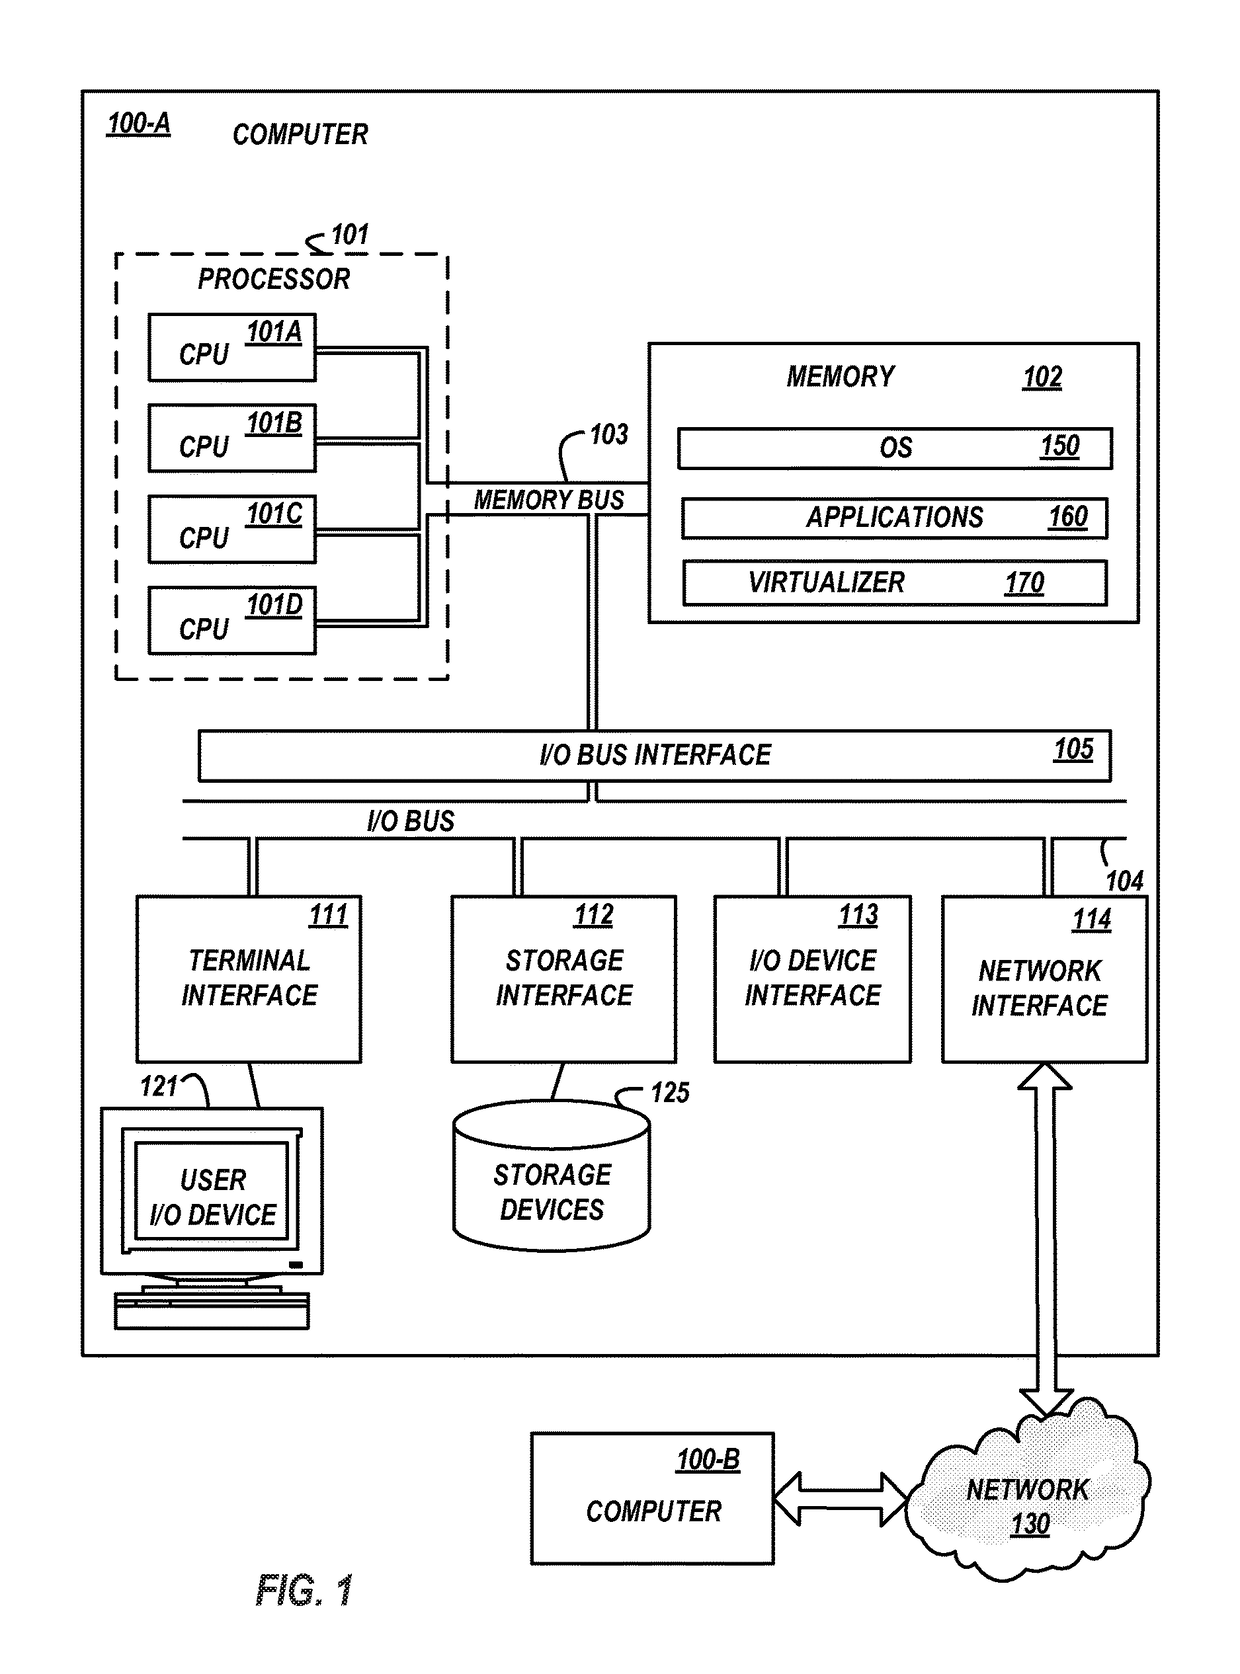 Memory scrubbing in a mirrored memory system to reduce system power consumption